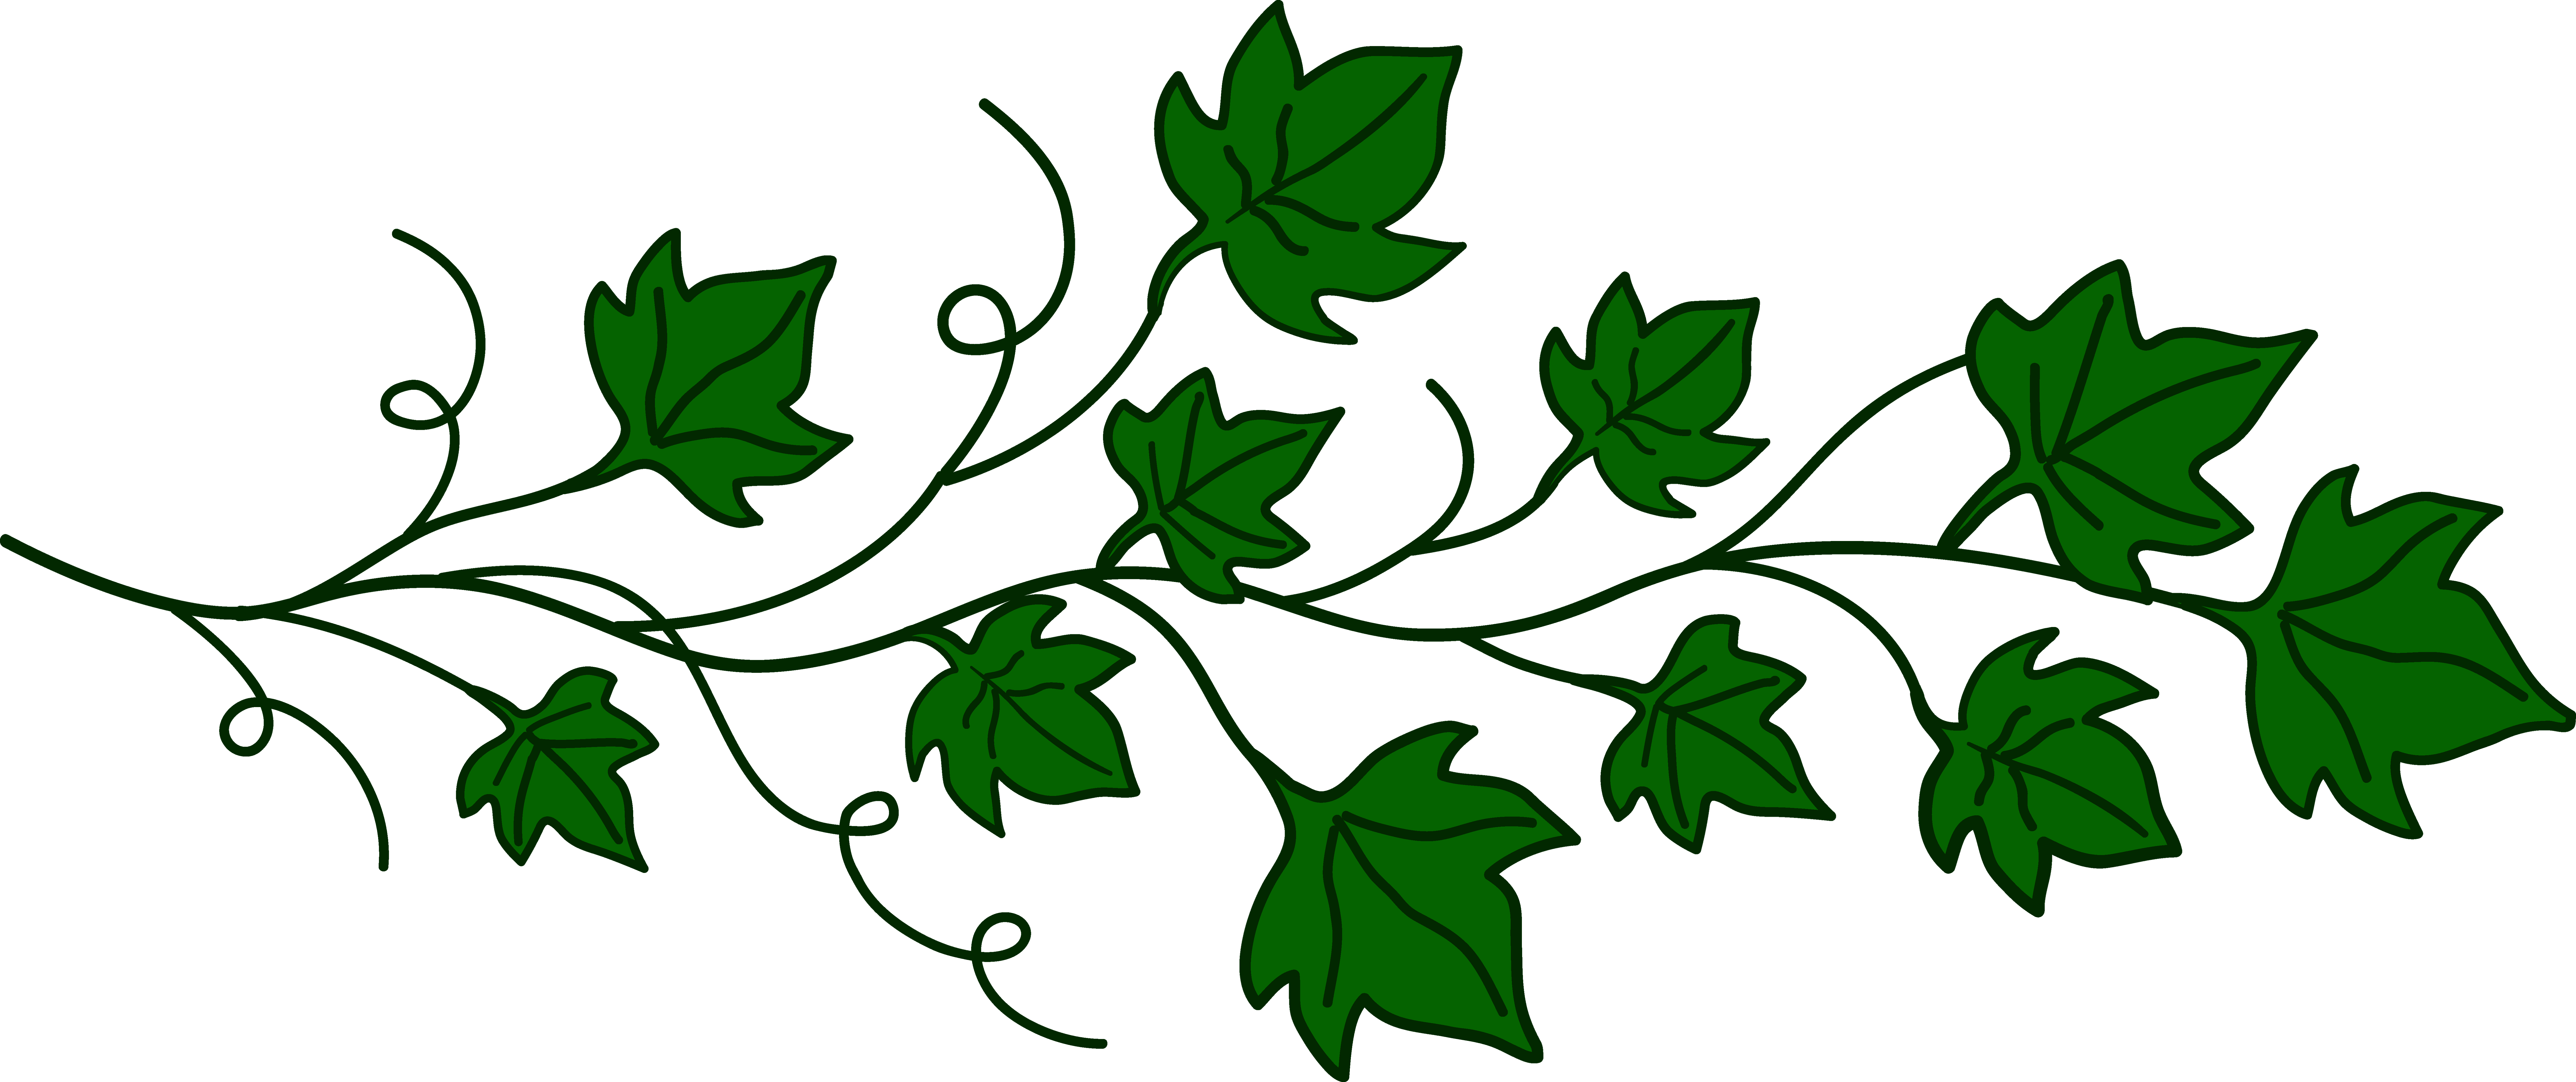 Vine Of Ivy Leaves Image Png Clipart